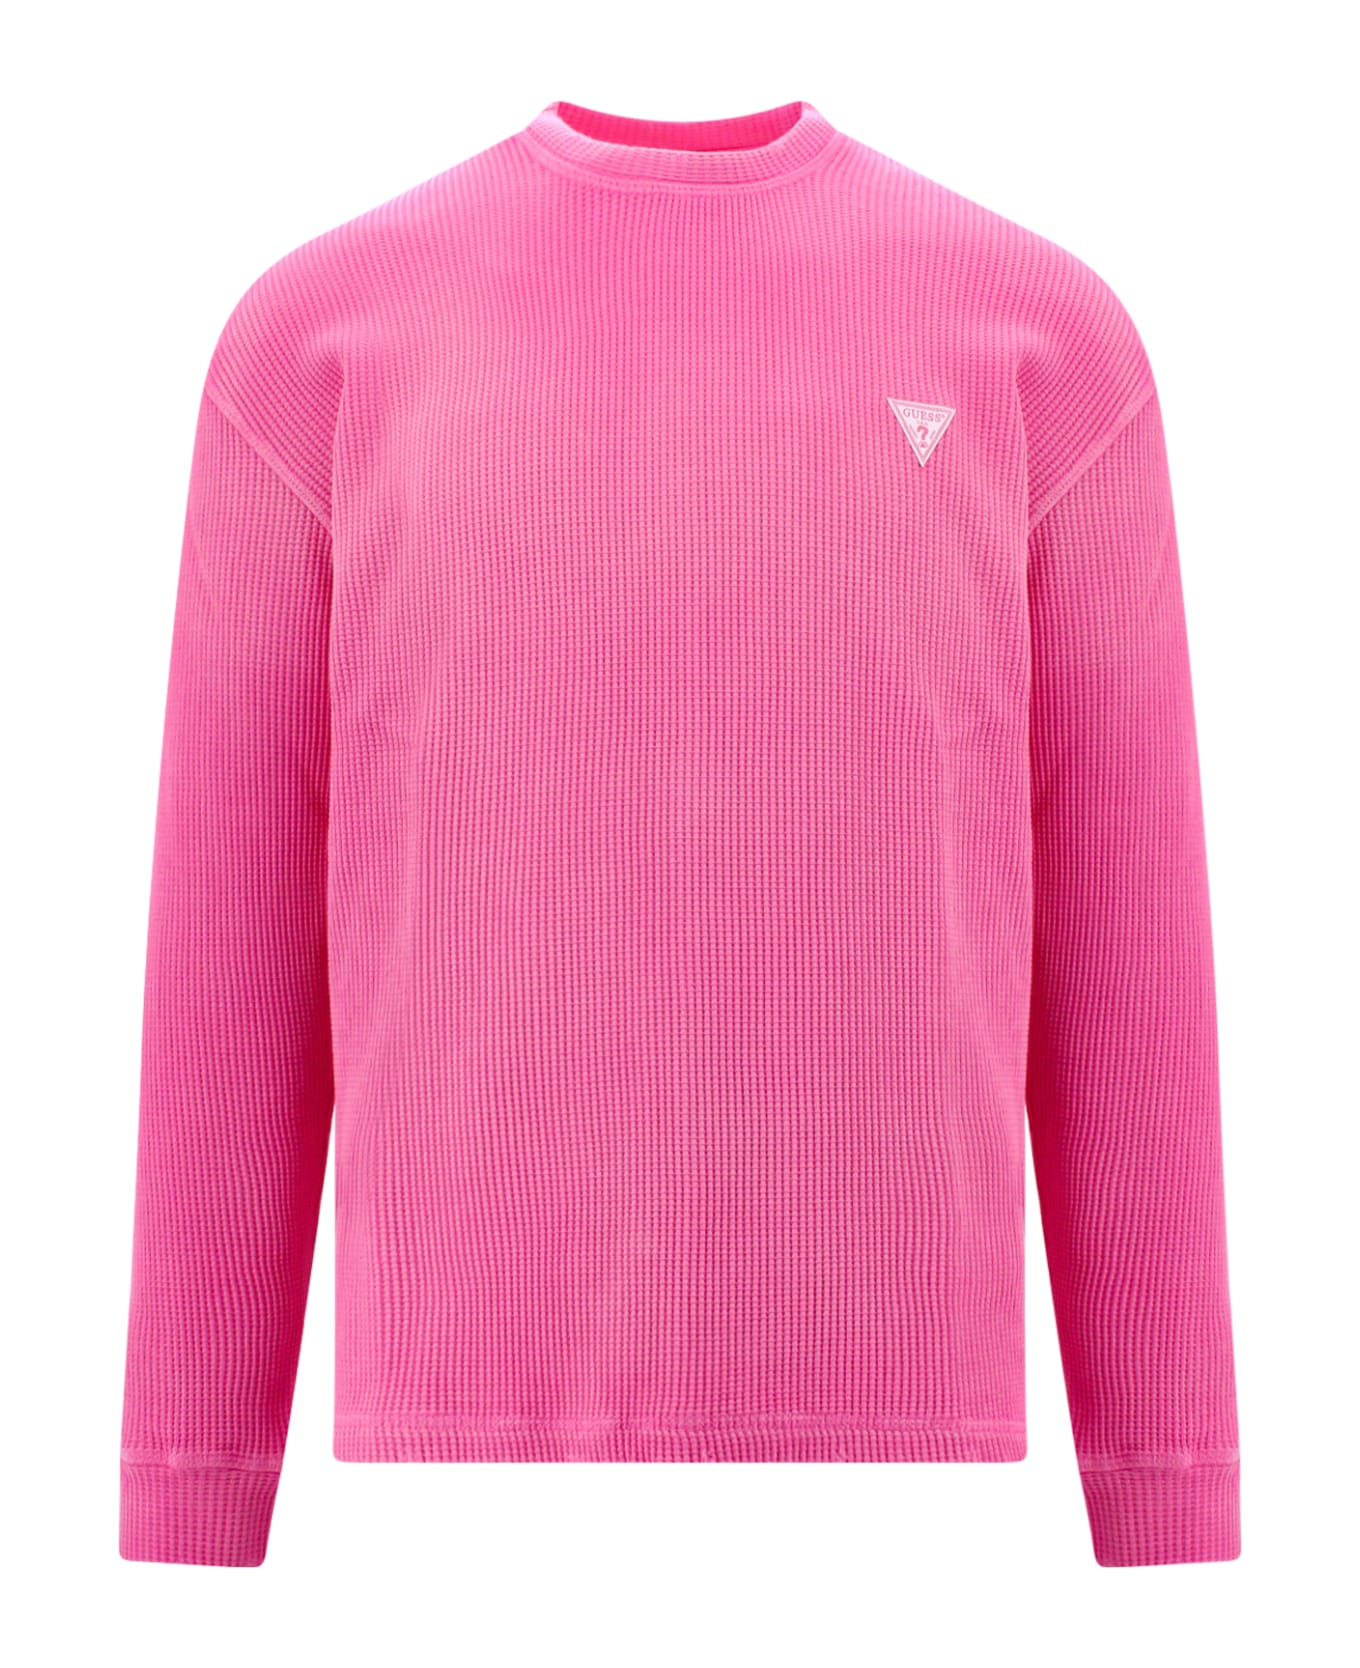 Guess Sweater - Pink ニットウェア